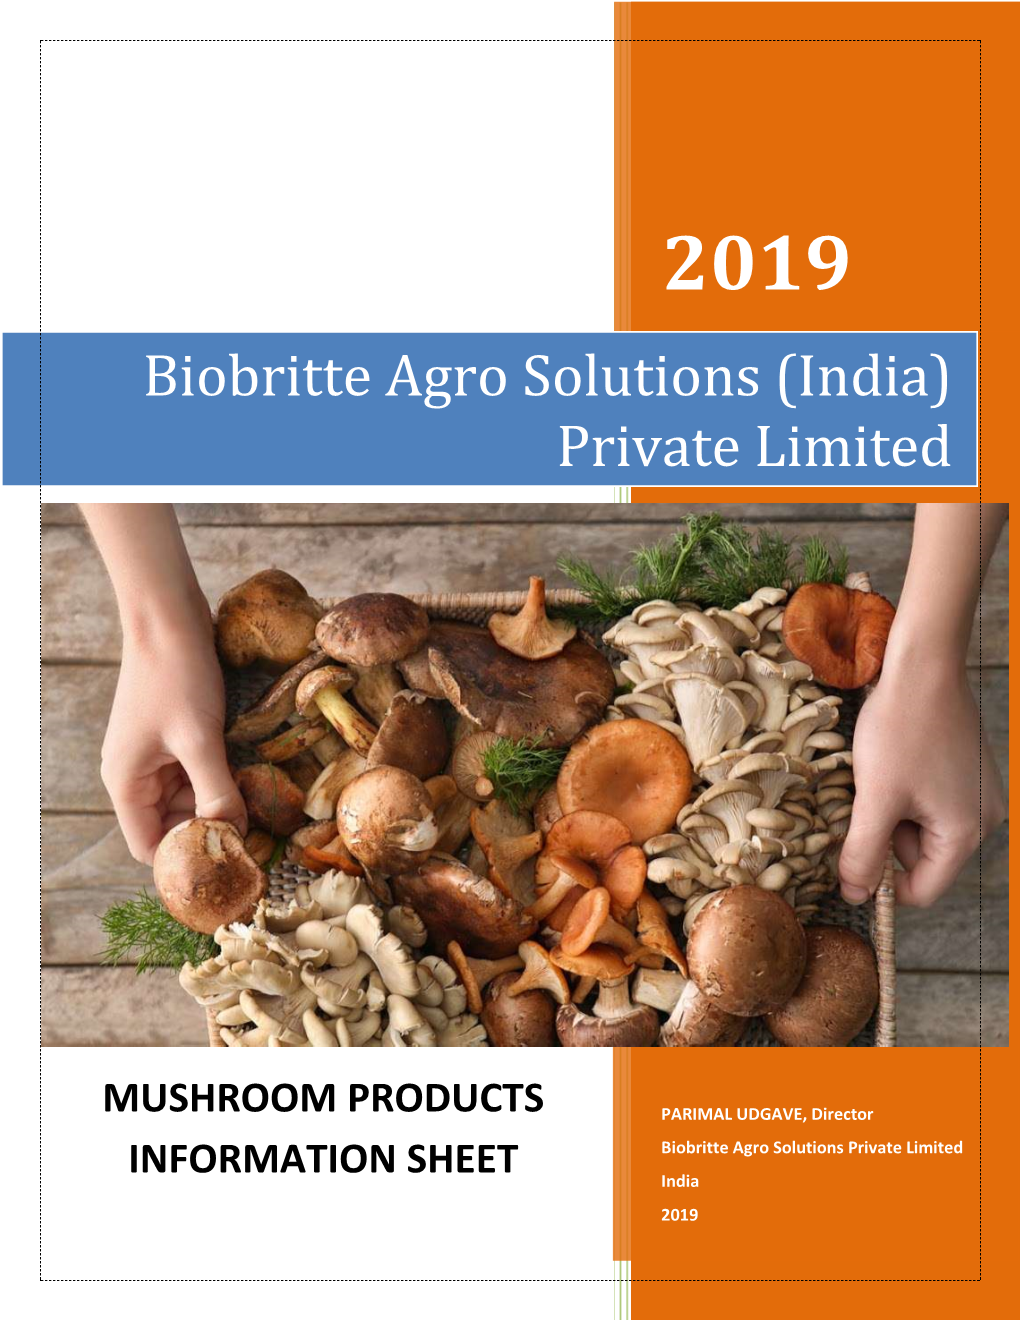 Biobritte Agro Solutions (India) Private Limited